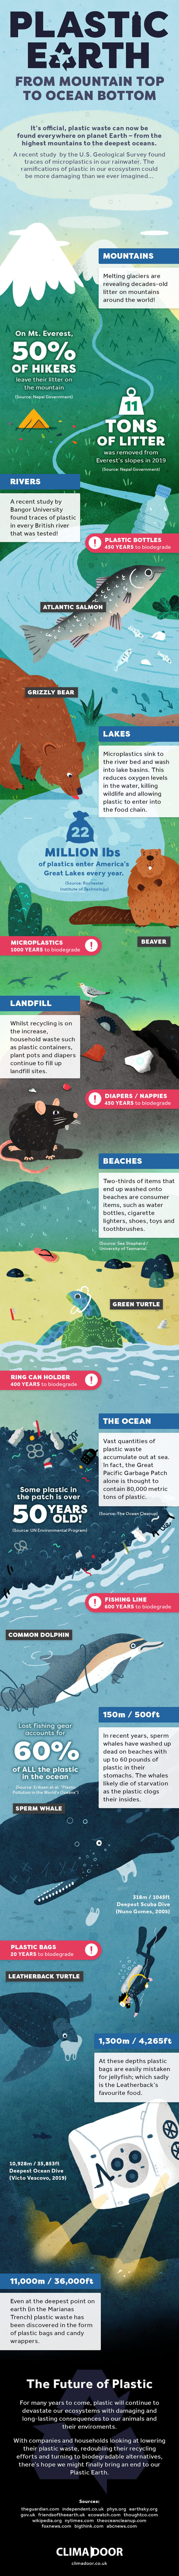 How Plastic Pollution Affects Our Planet: From Mountain Top To Ocean Floor (Infographic)